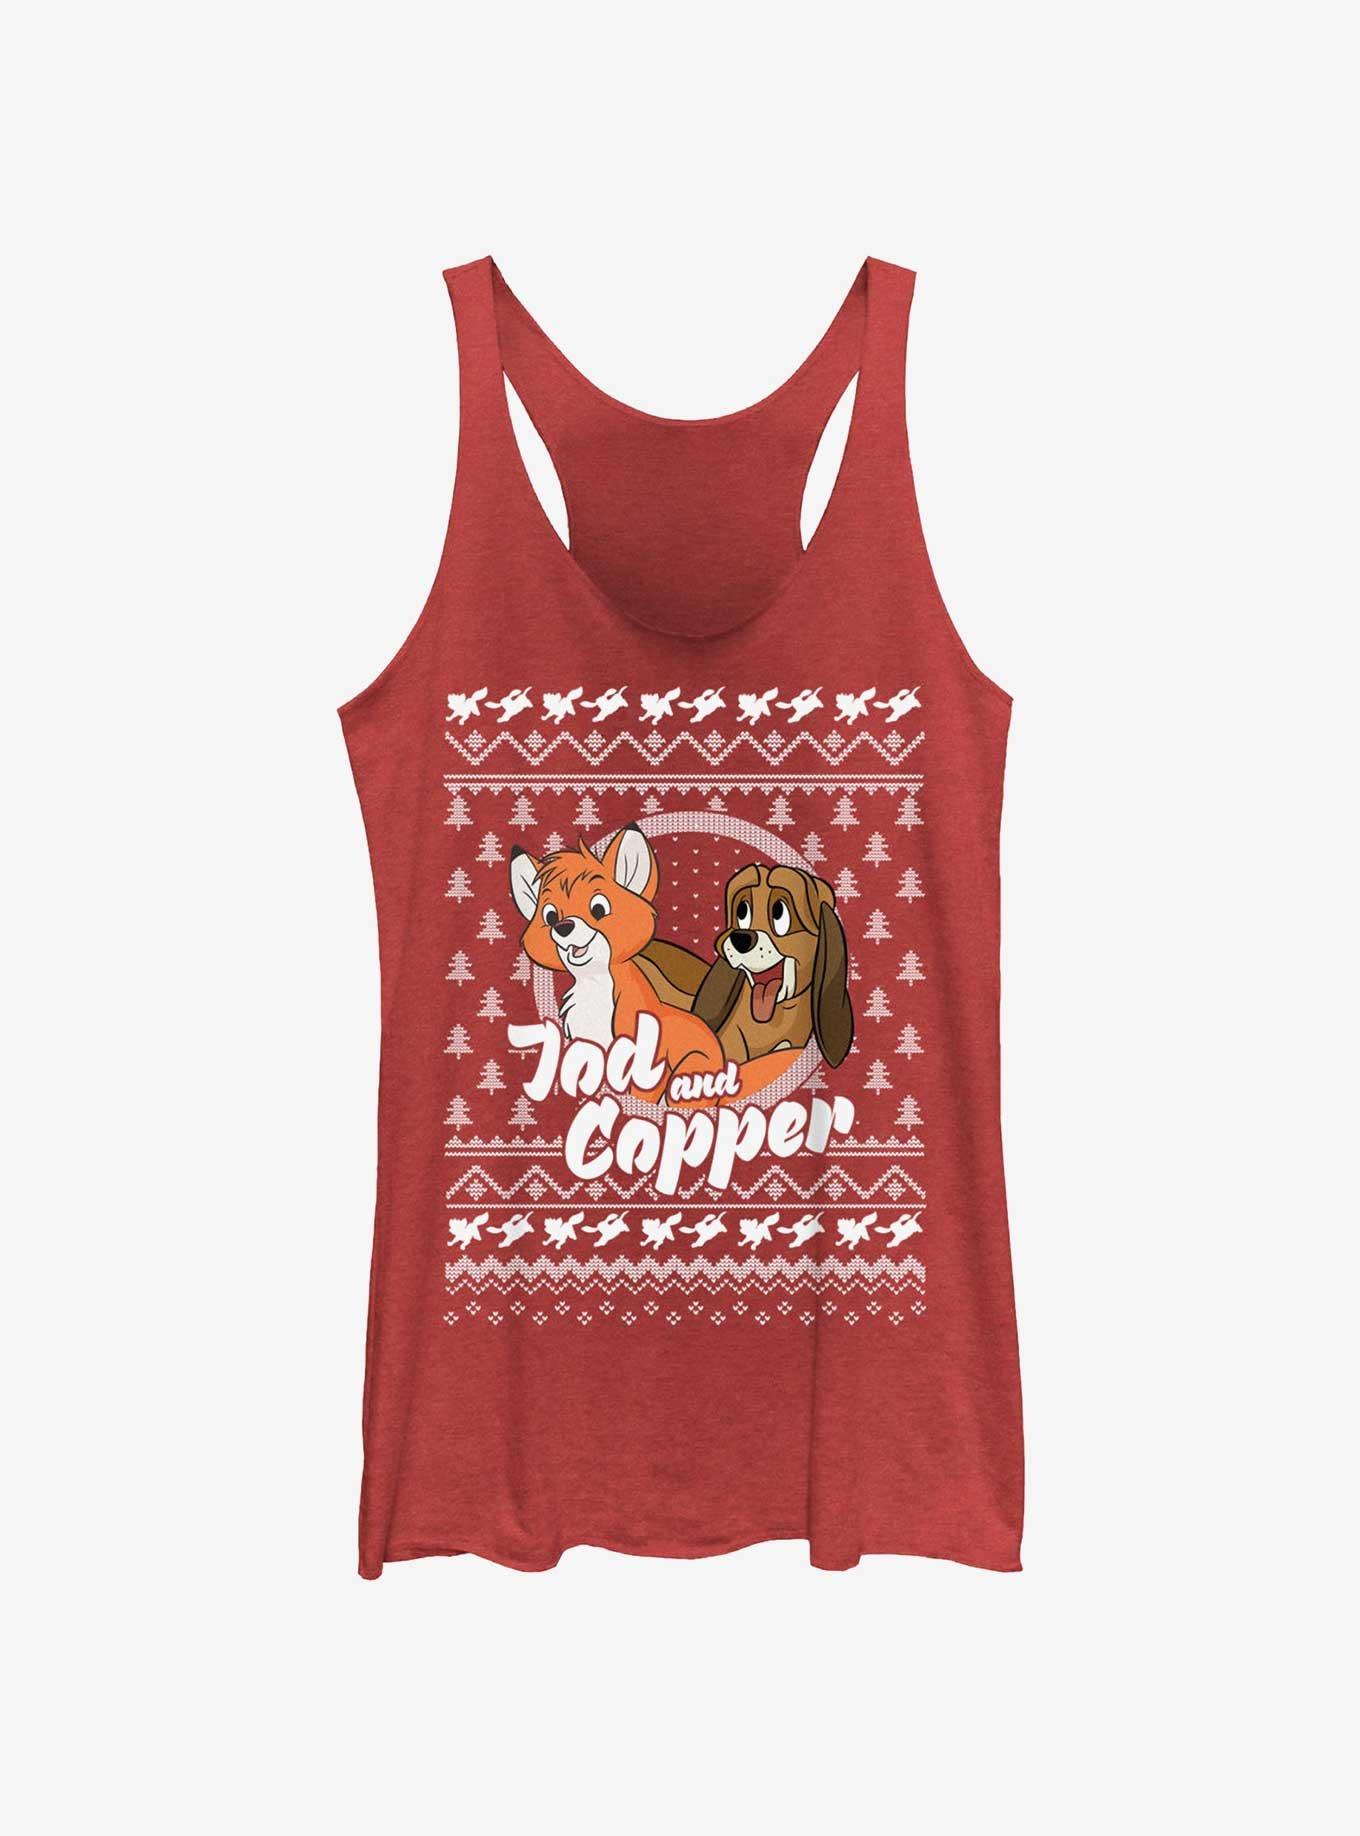 Disney The Fox and the Hound Tod and Copper Ugly Christmas Womens Tank Top  - RED